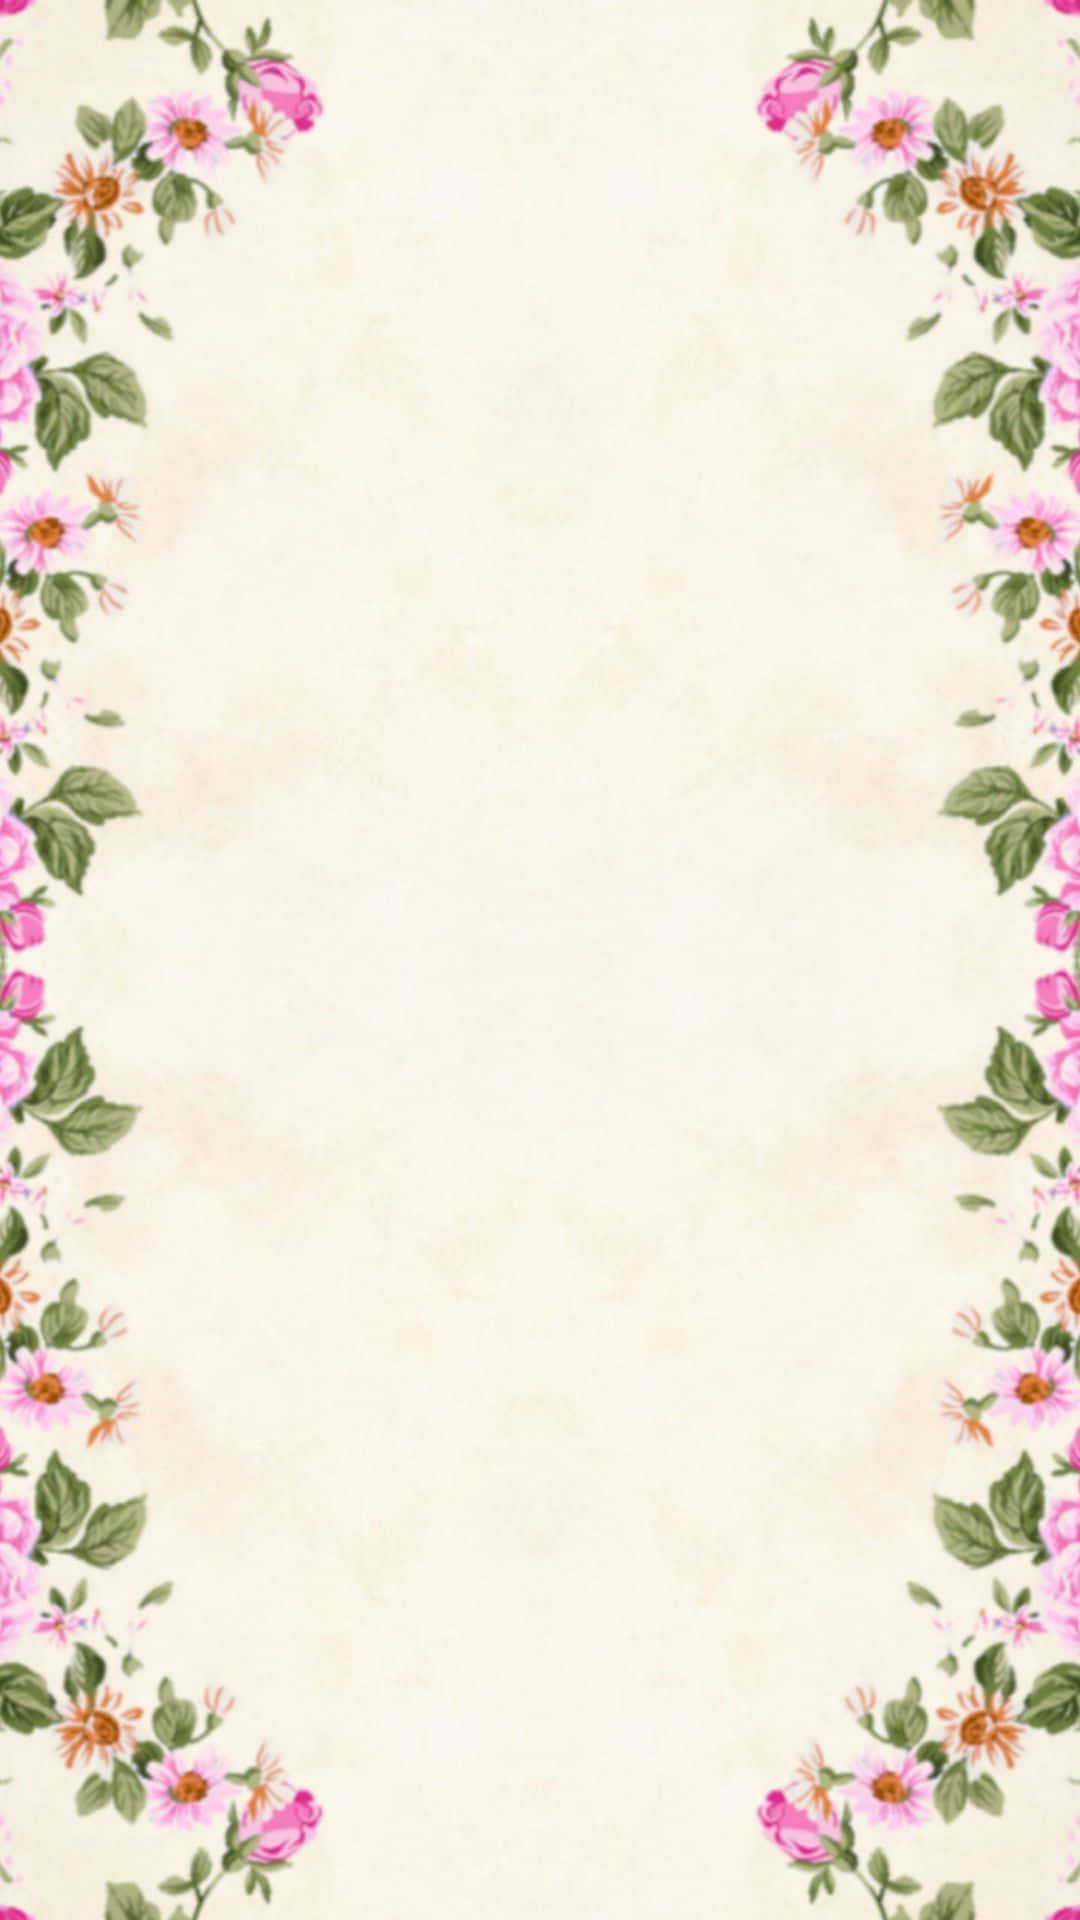 A Pink Floral Frame With A White Background